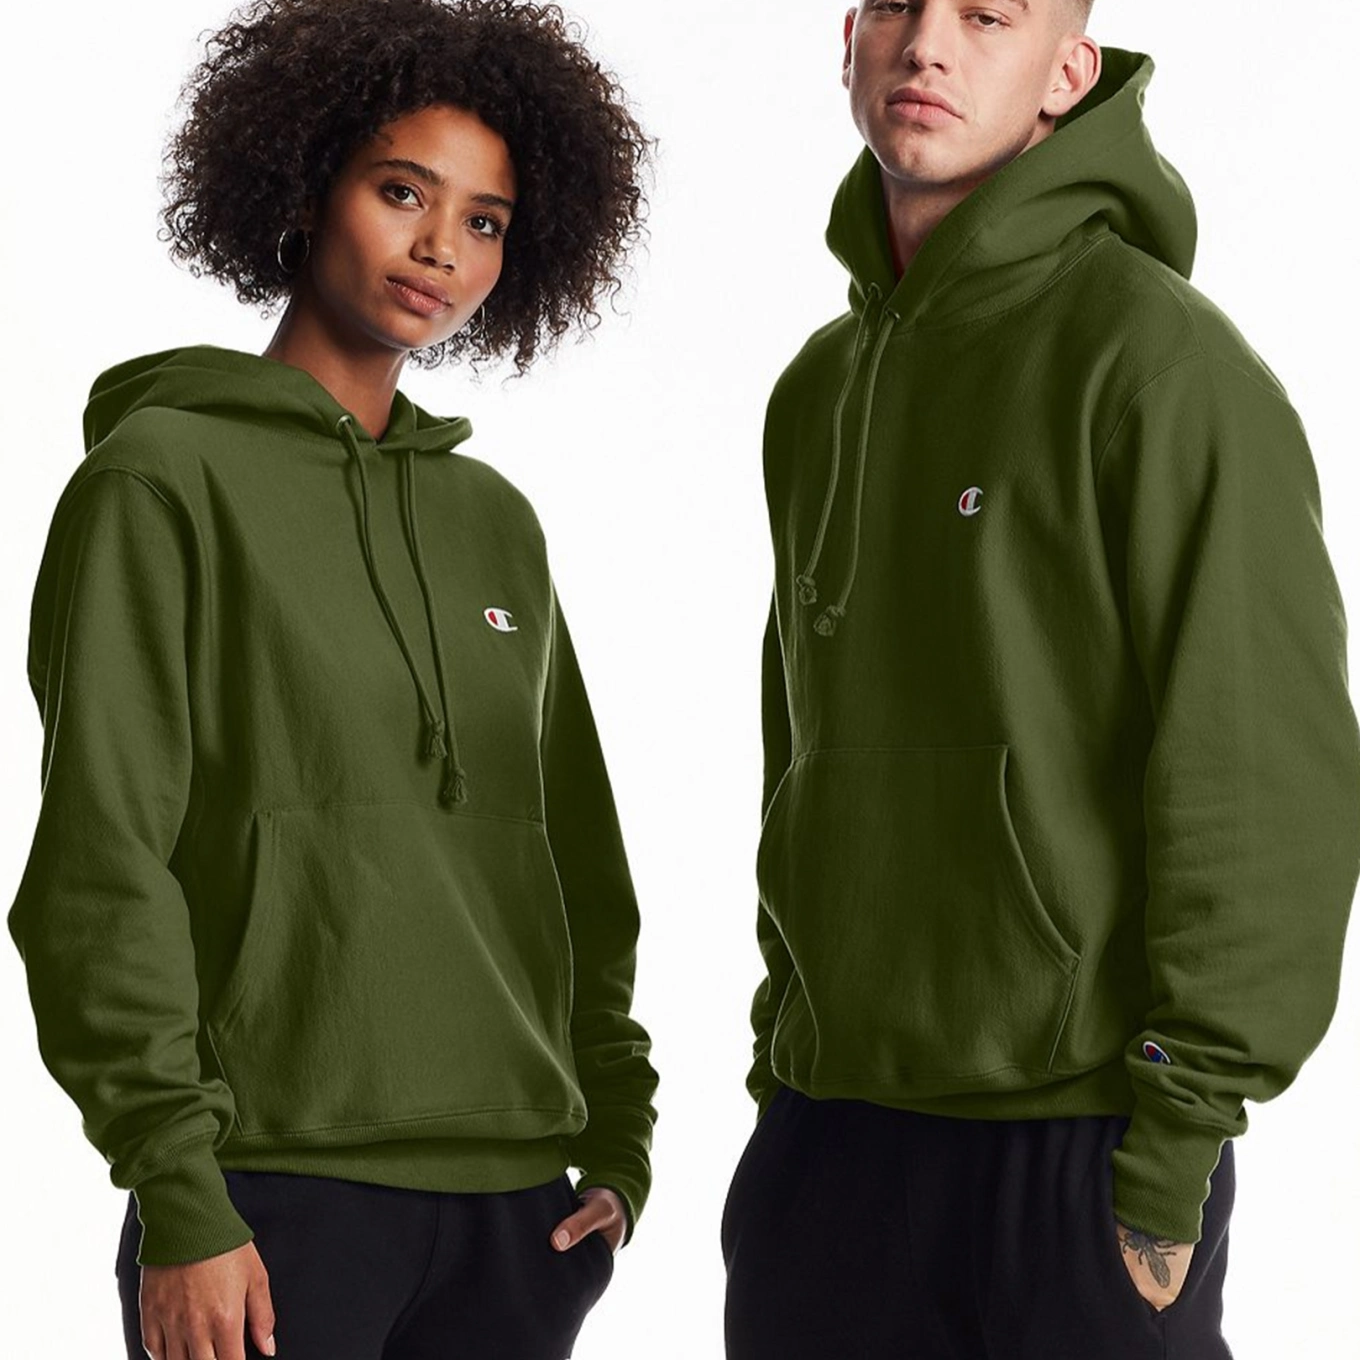 Hoodies for Himself as well as Her: Seeing as the Ideal Fit